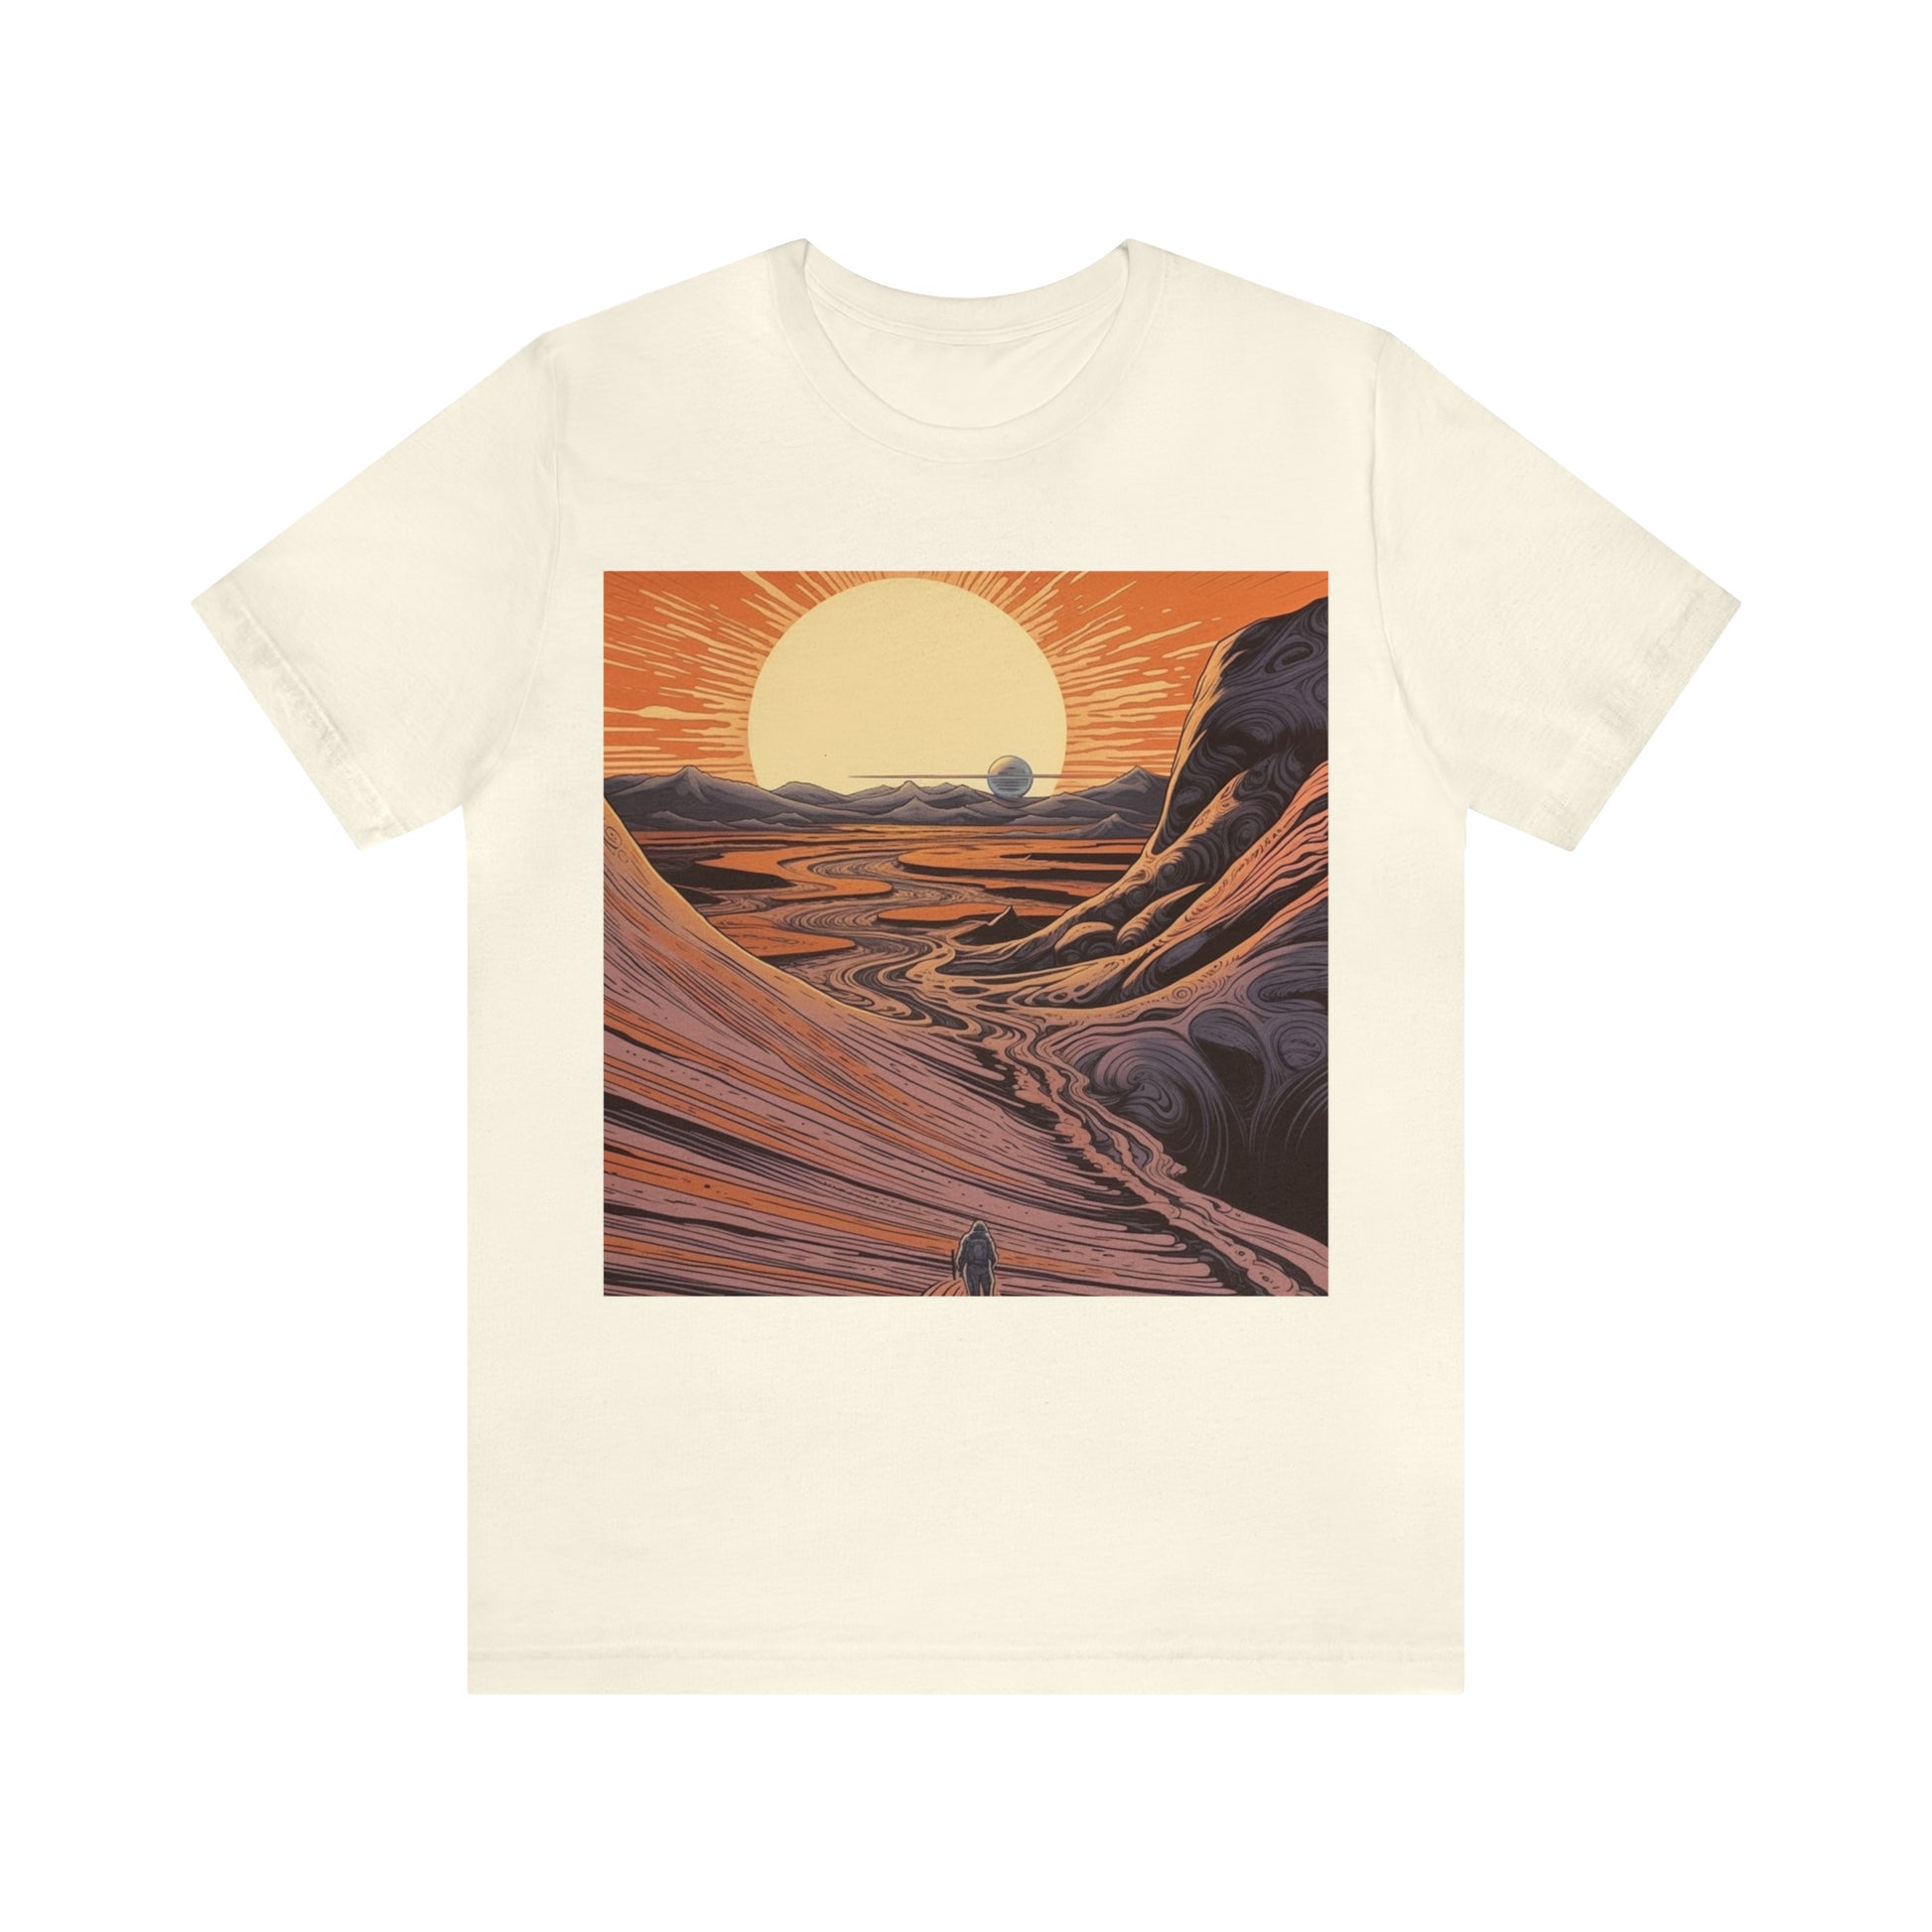 natural-quest-thread-tee-shirt-with-large-sunrise-over-dunes-on-center-of-shirt